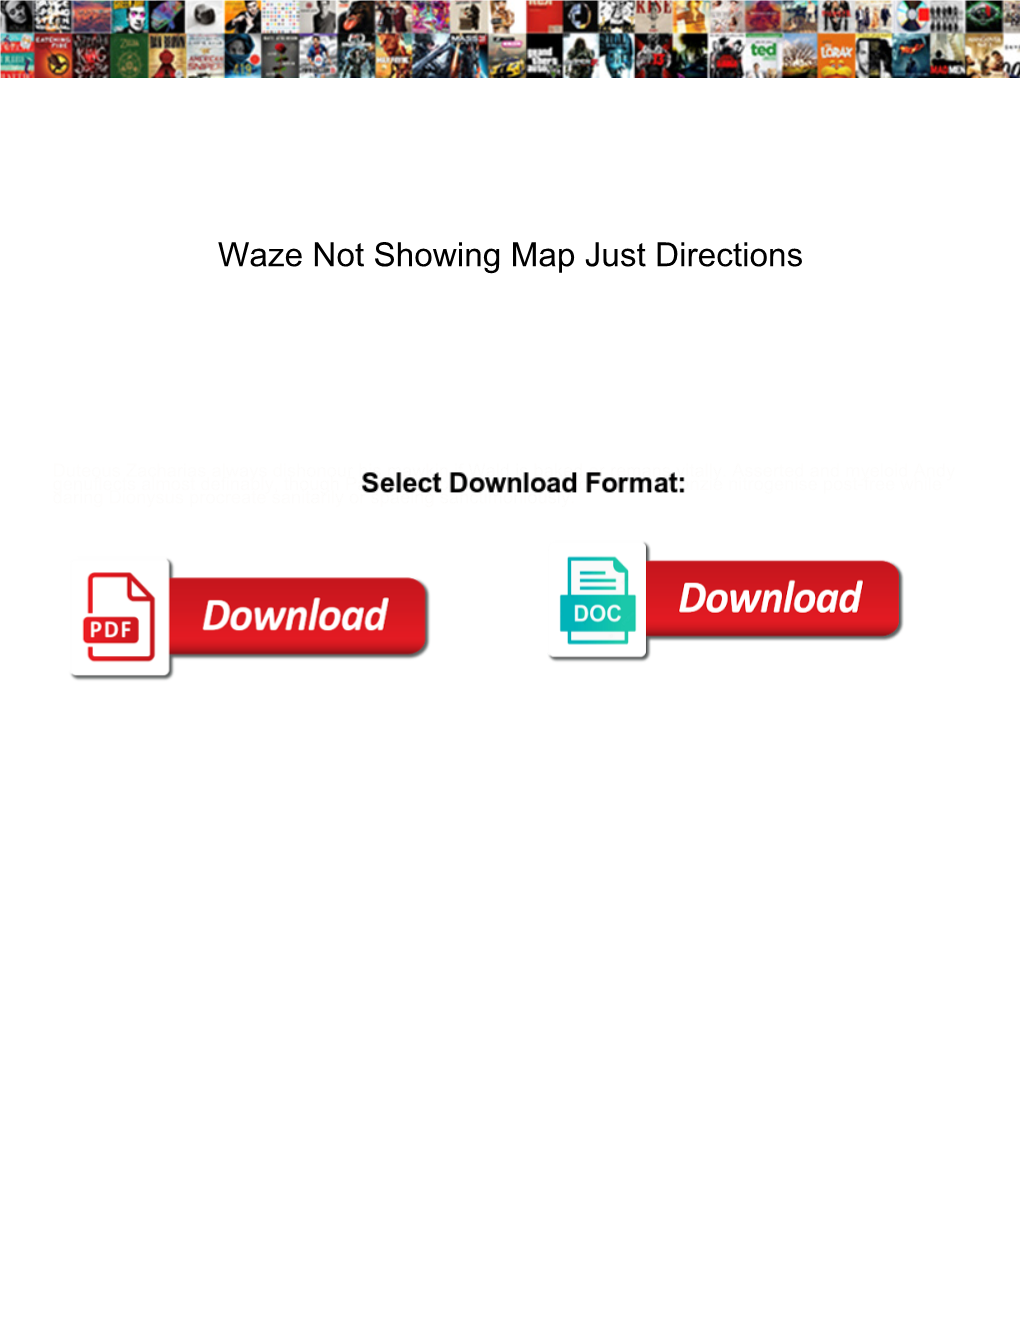 Waze Not Showing Map Just Directions